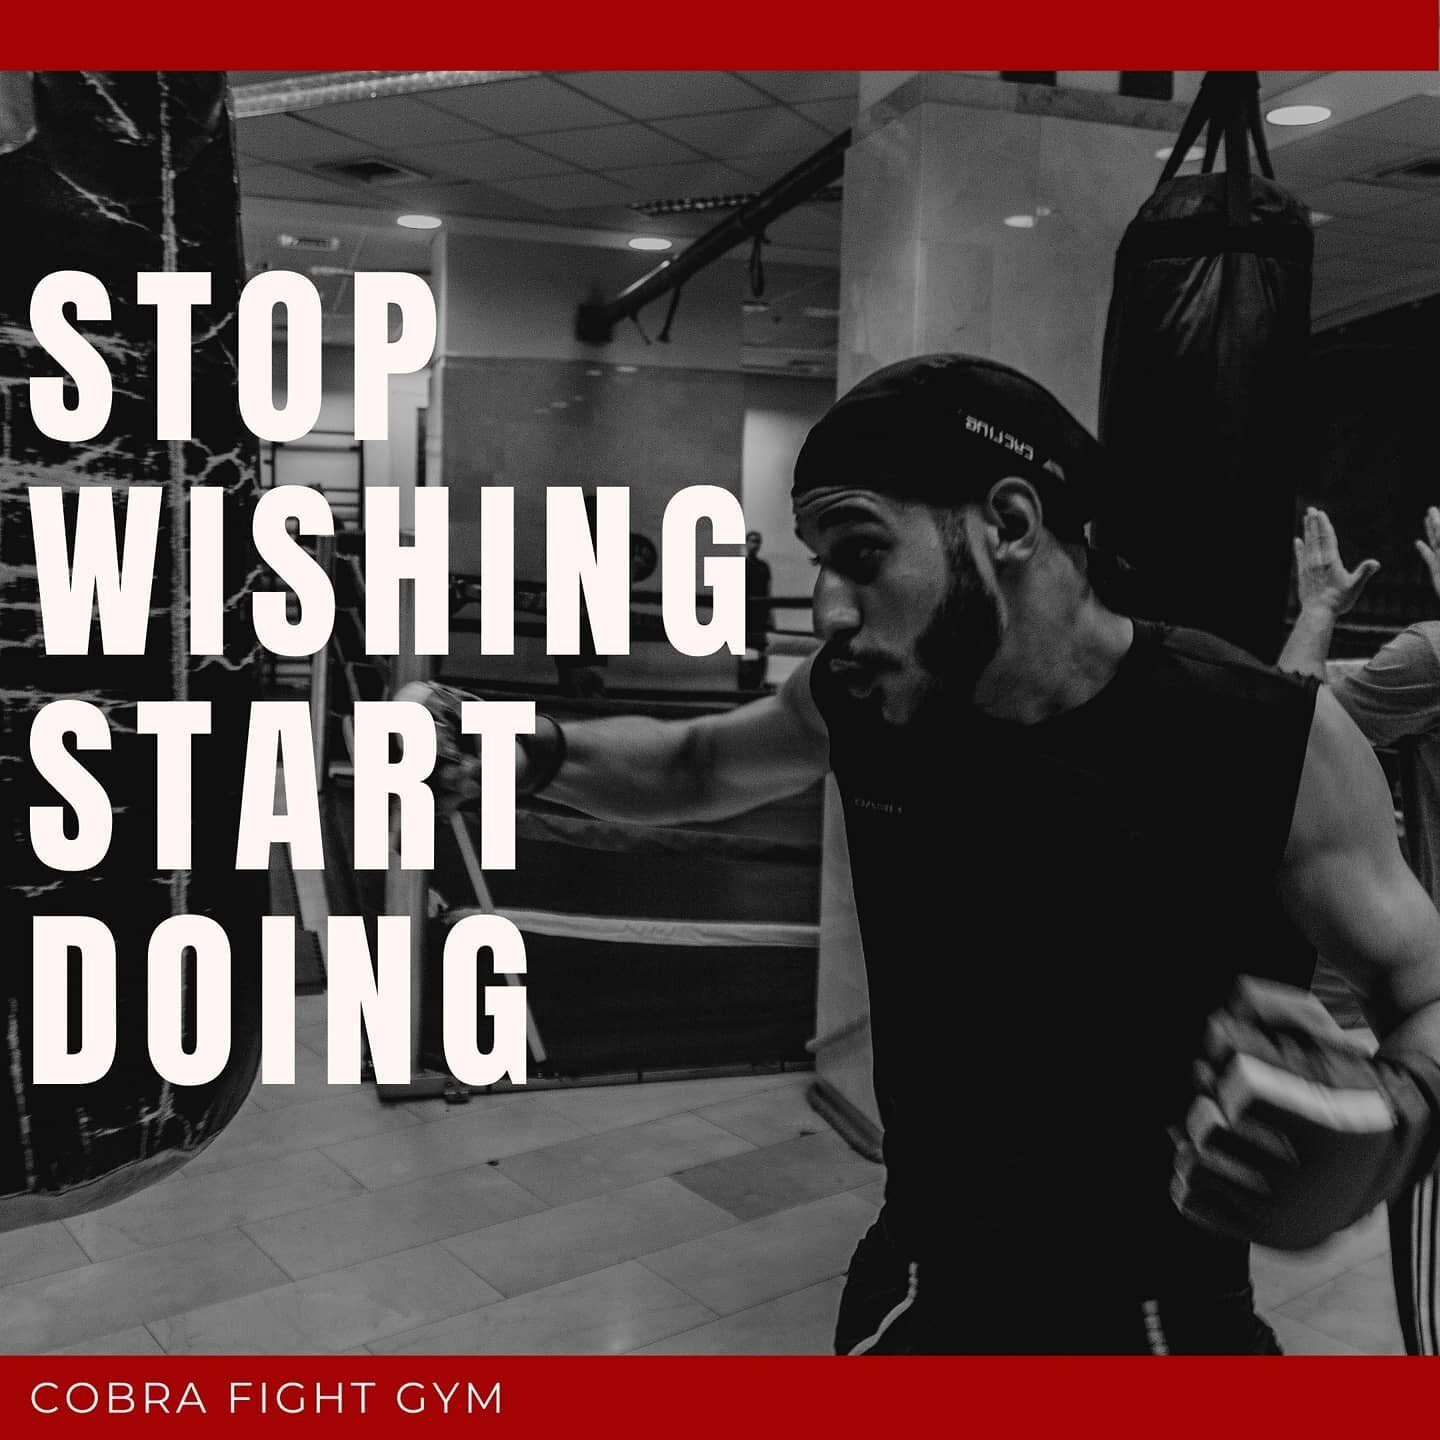 You will never reach full potential if you don't start. We want you to be the very best you can be, all the time.
.
.
.
#cobrafightgym #singapore #getmotivated #fitfam #weightloss #buildmuscle #getfit #fitness #boxing #boxingcoach #muaythai #kickboxi